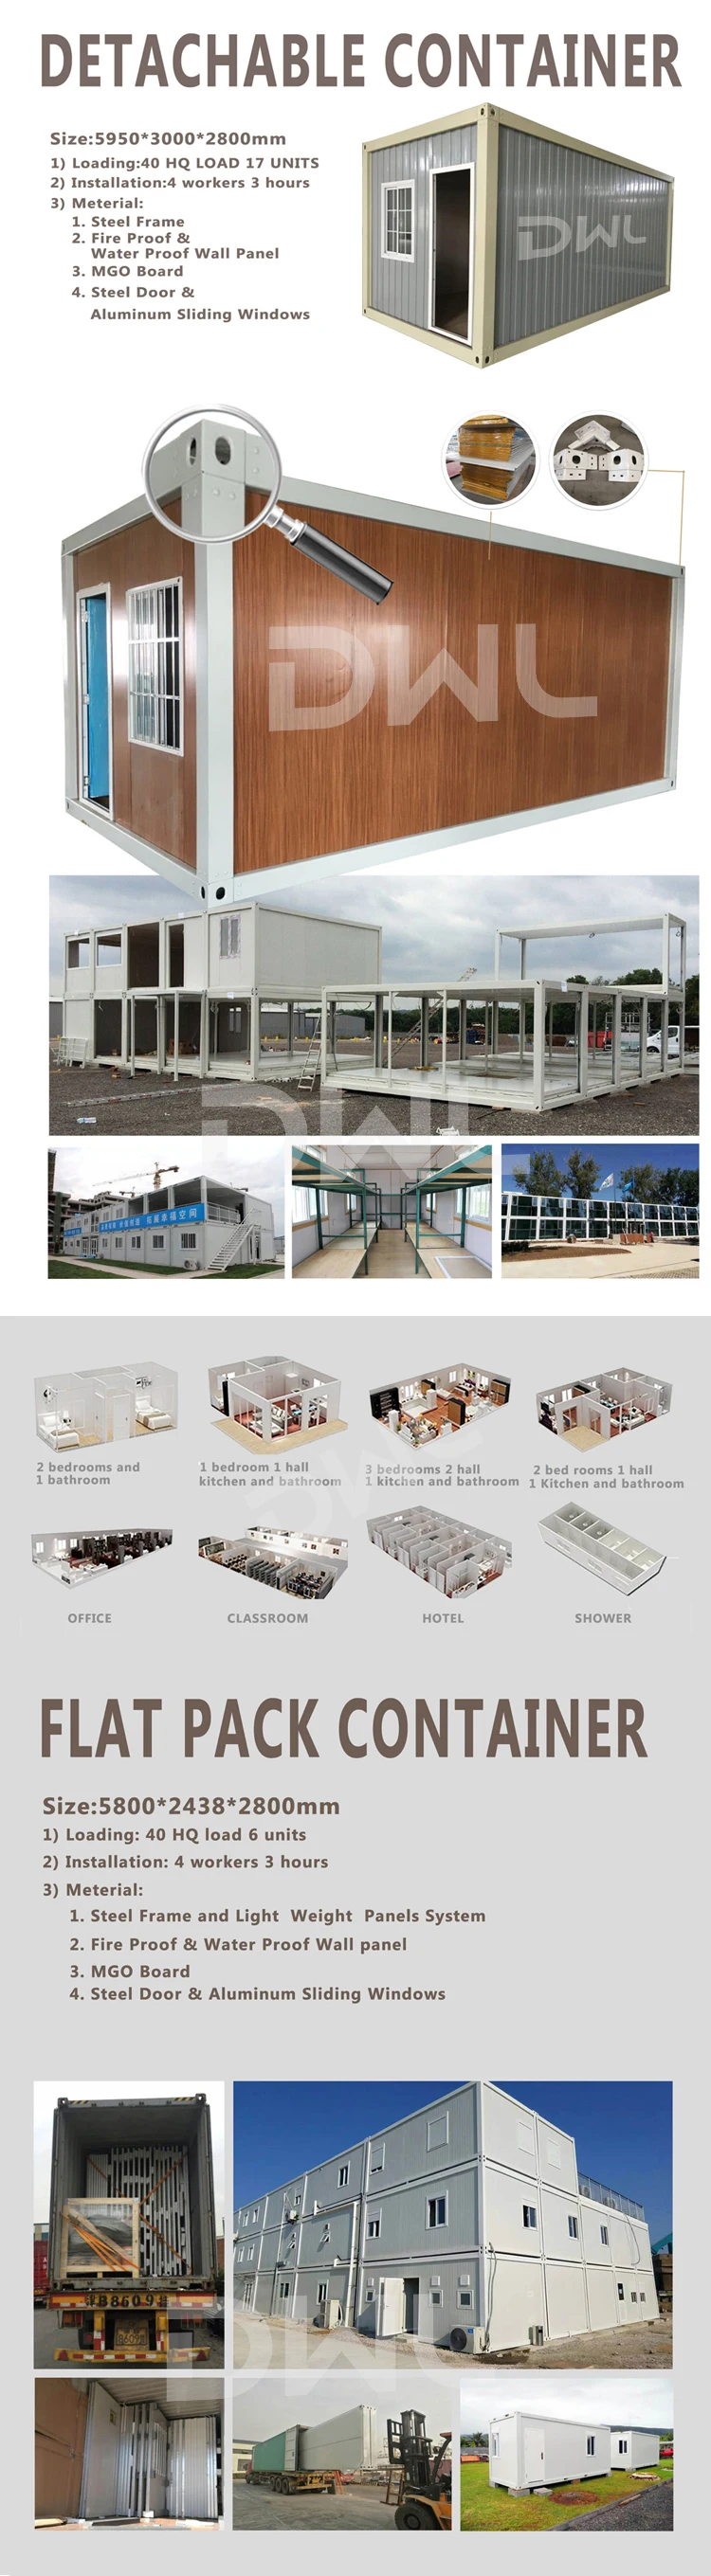 prefabricated house container.jpg